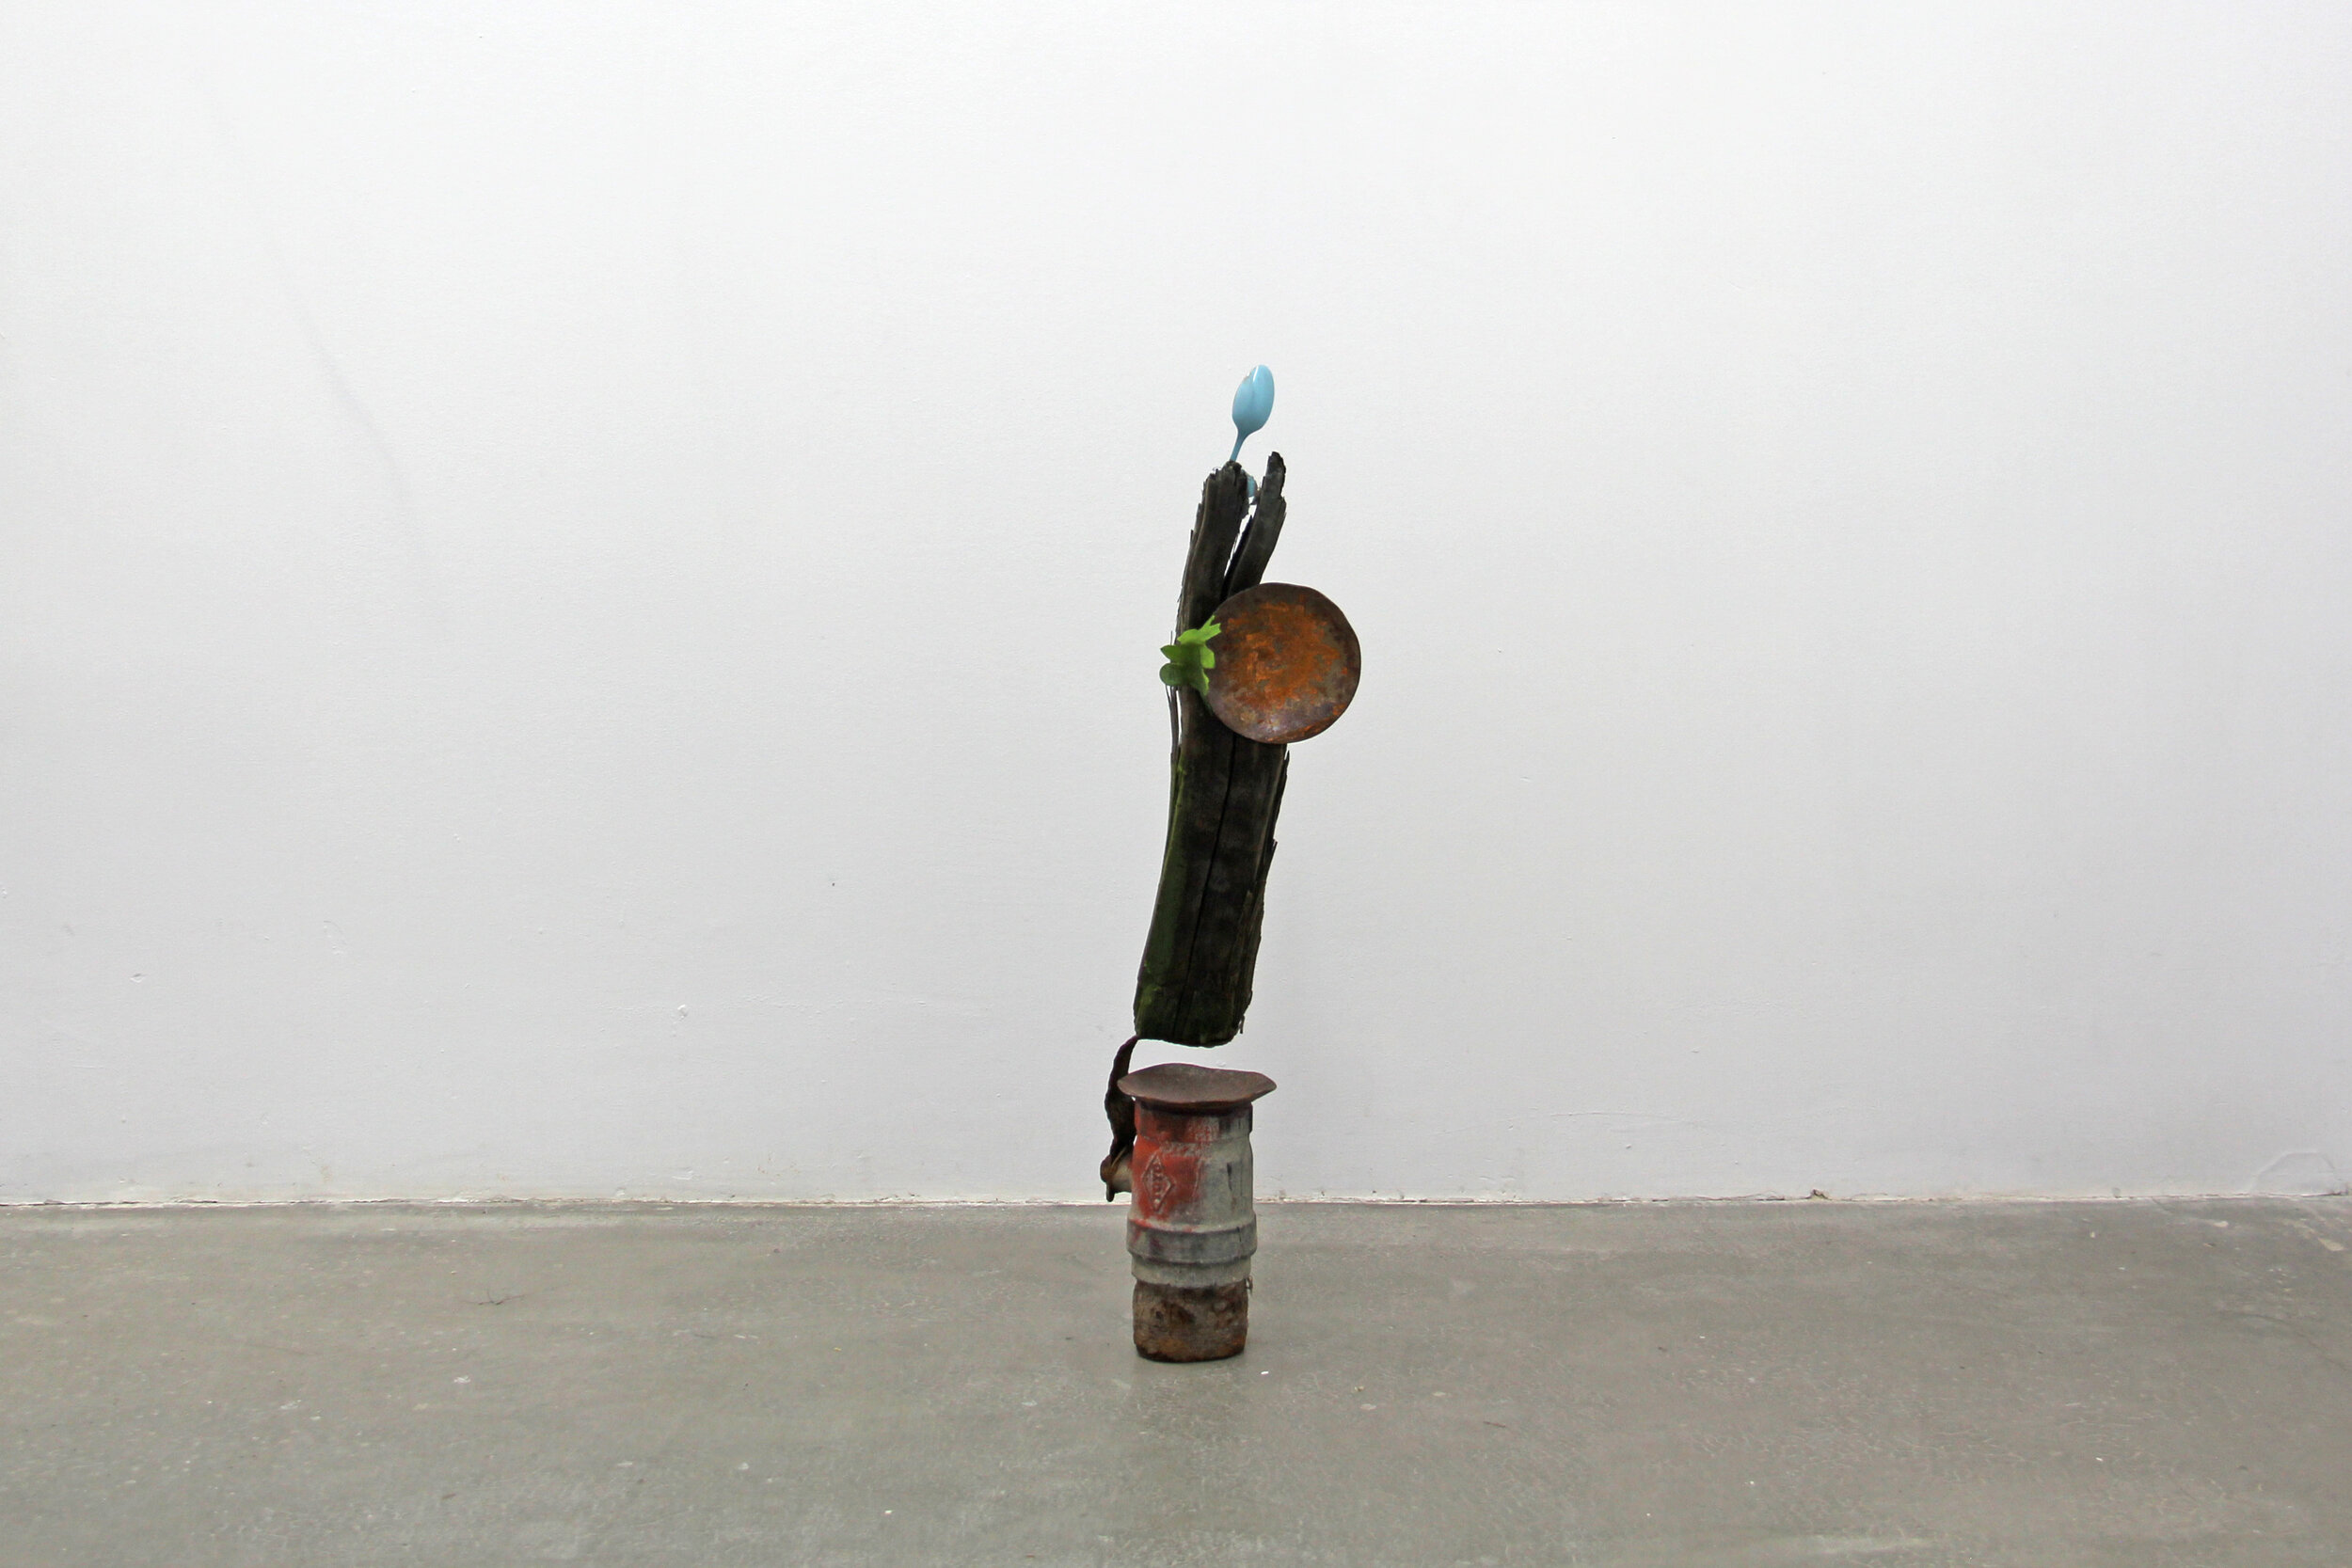  Georgia Dickie,  ToolHog , 2020, Found objects and paint, 24.25 x 7 x 4 in (61.6 x 17.8 x 10.2 cm)  